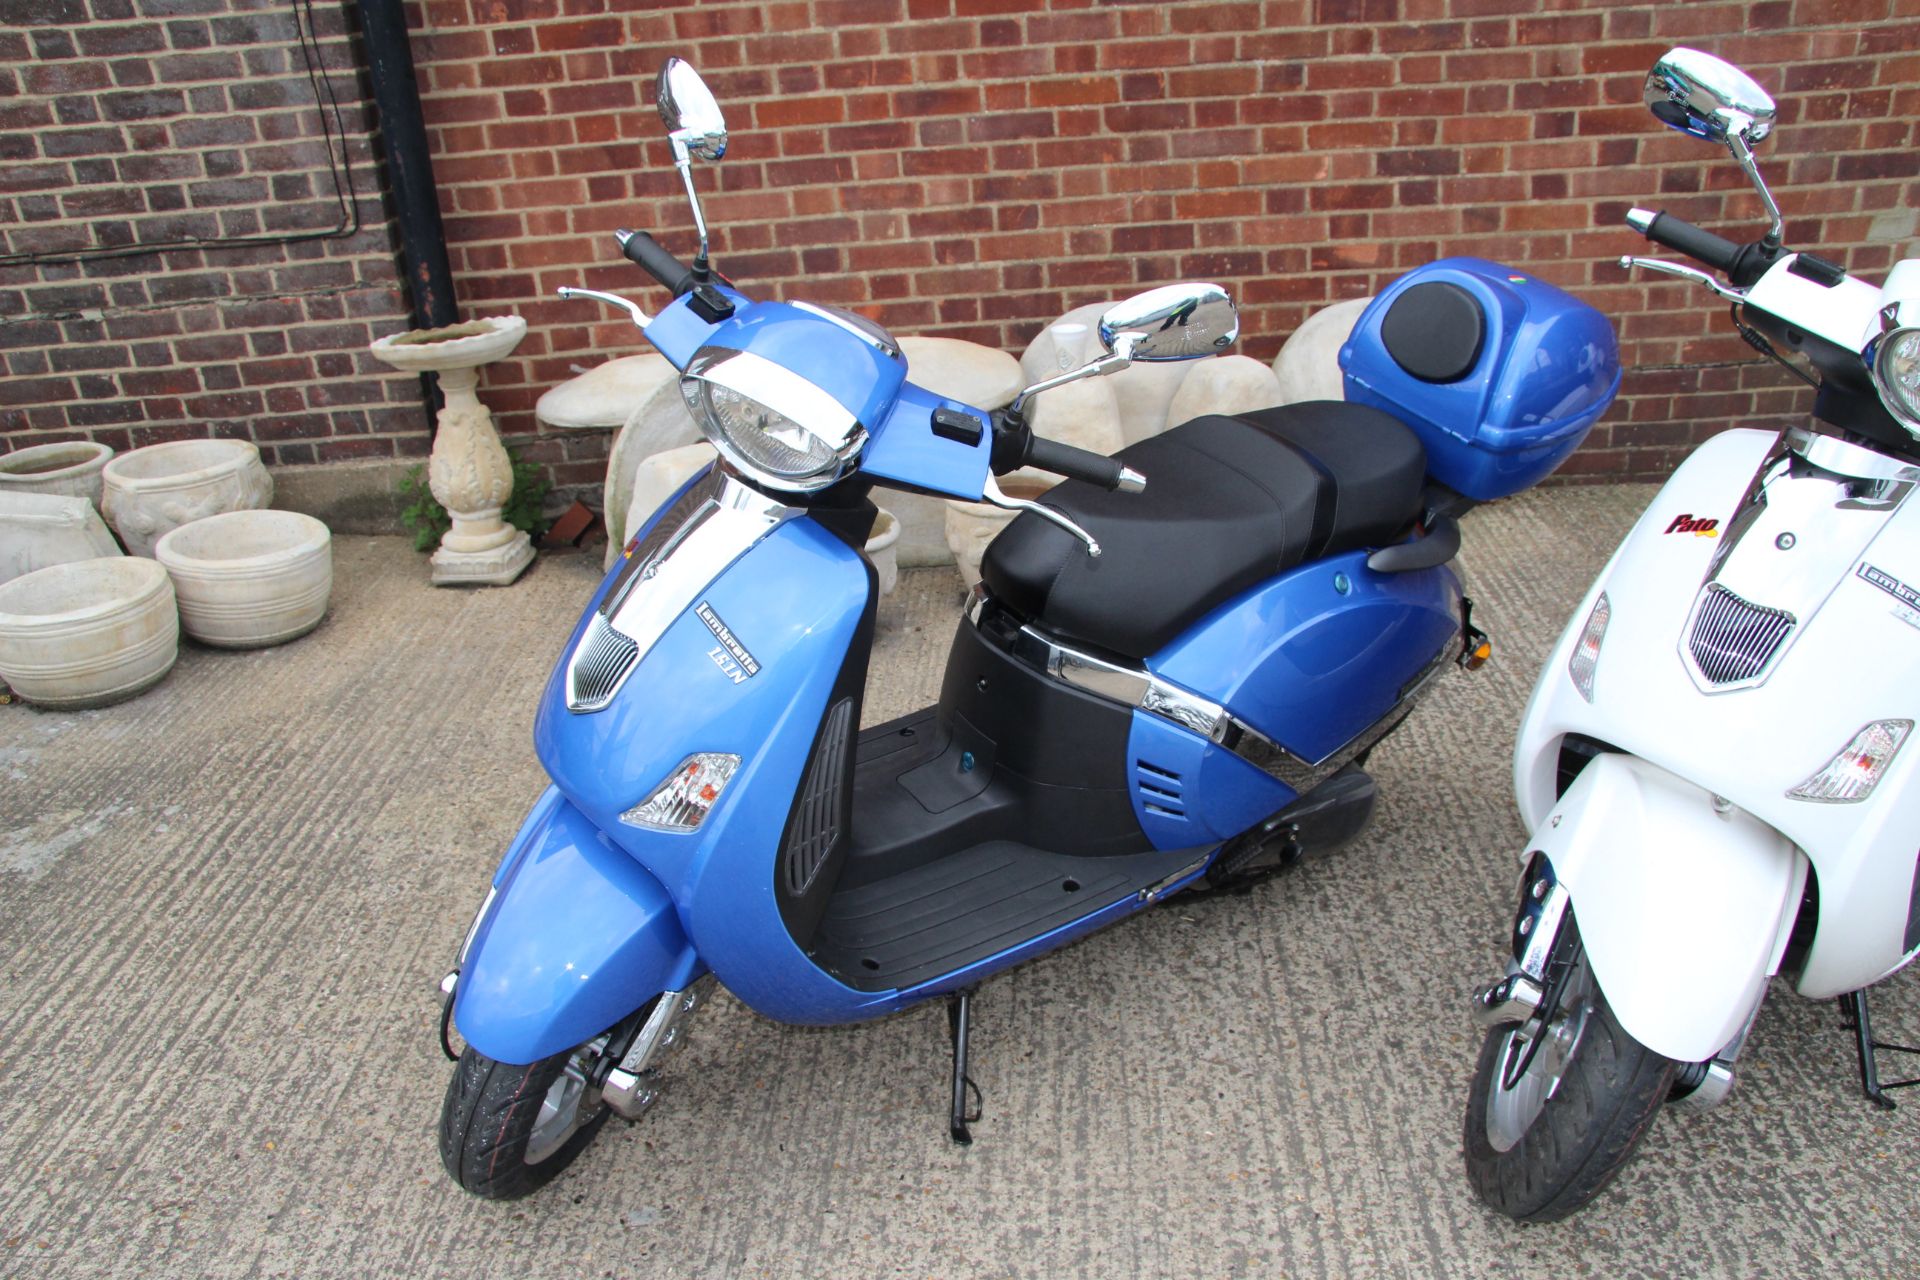 V Brand New Lambretta Pato 151cc Scooter- GREY-/Mileage 00000 Boxed ISP 1250 (Motorcycle Movers)